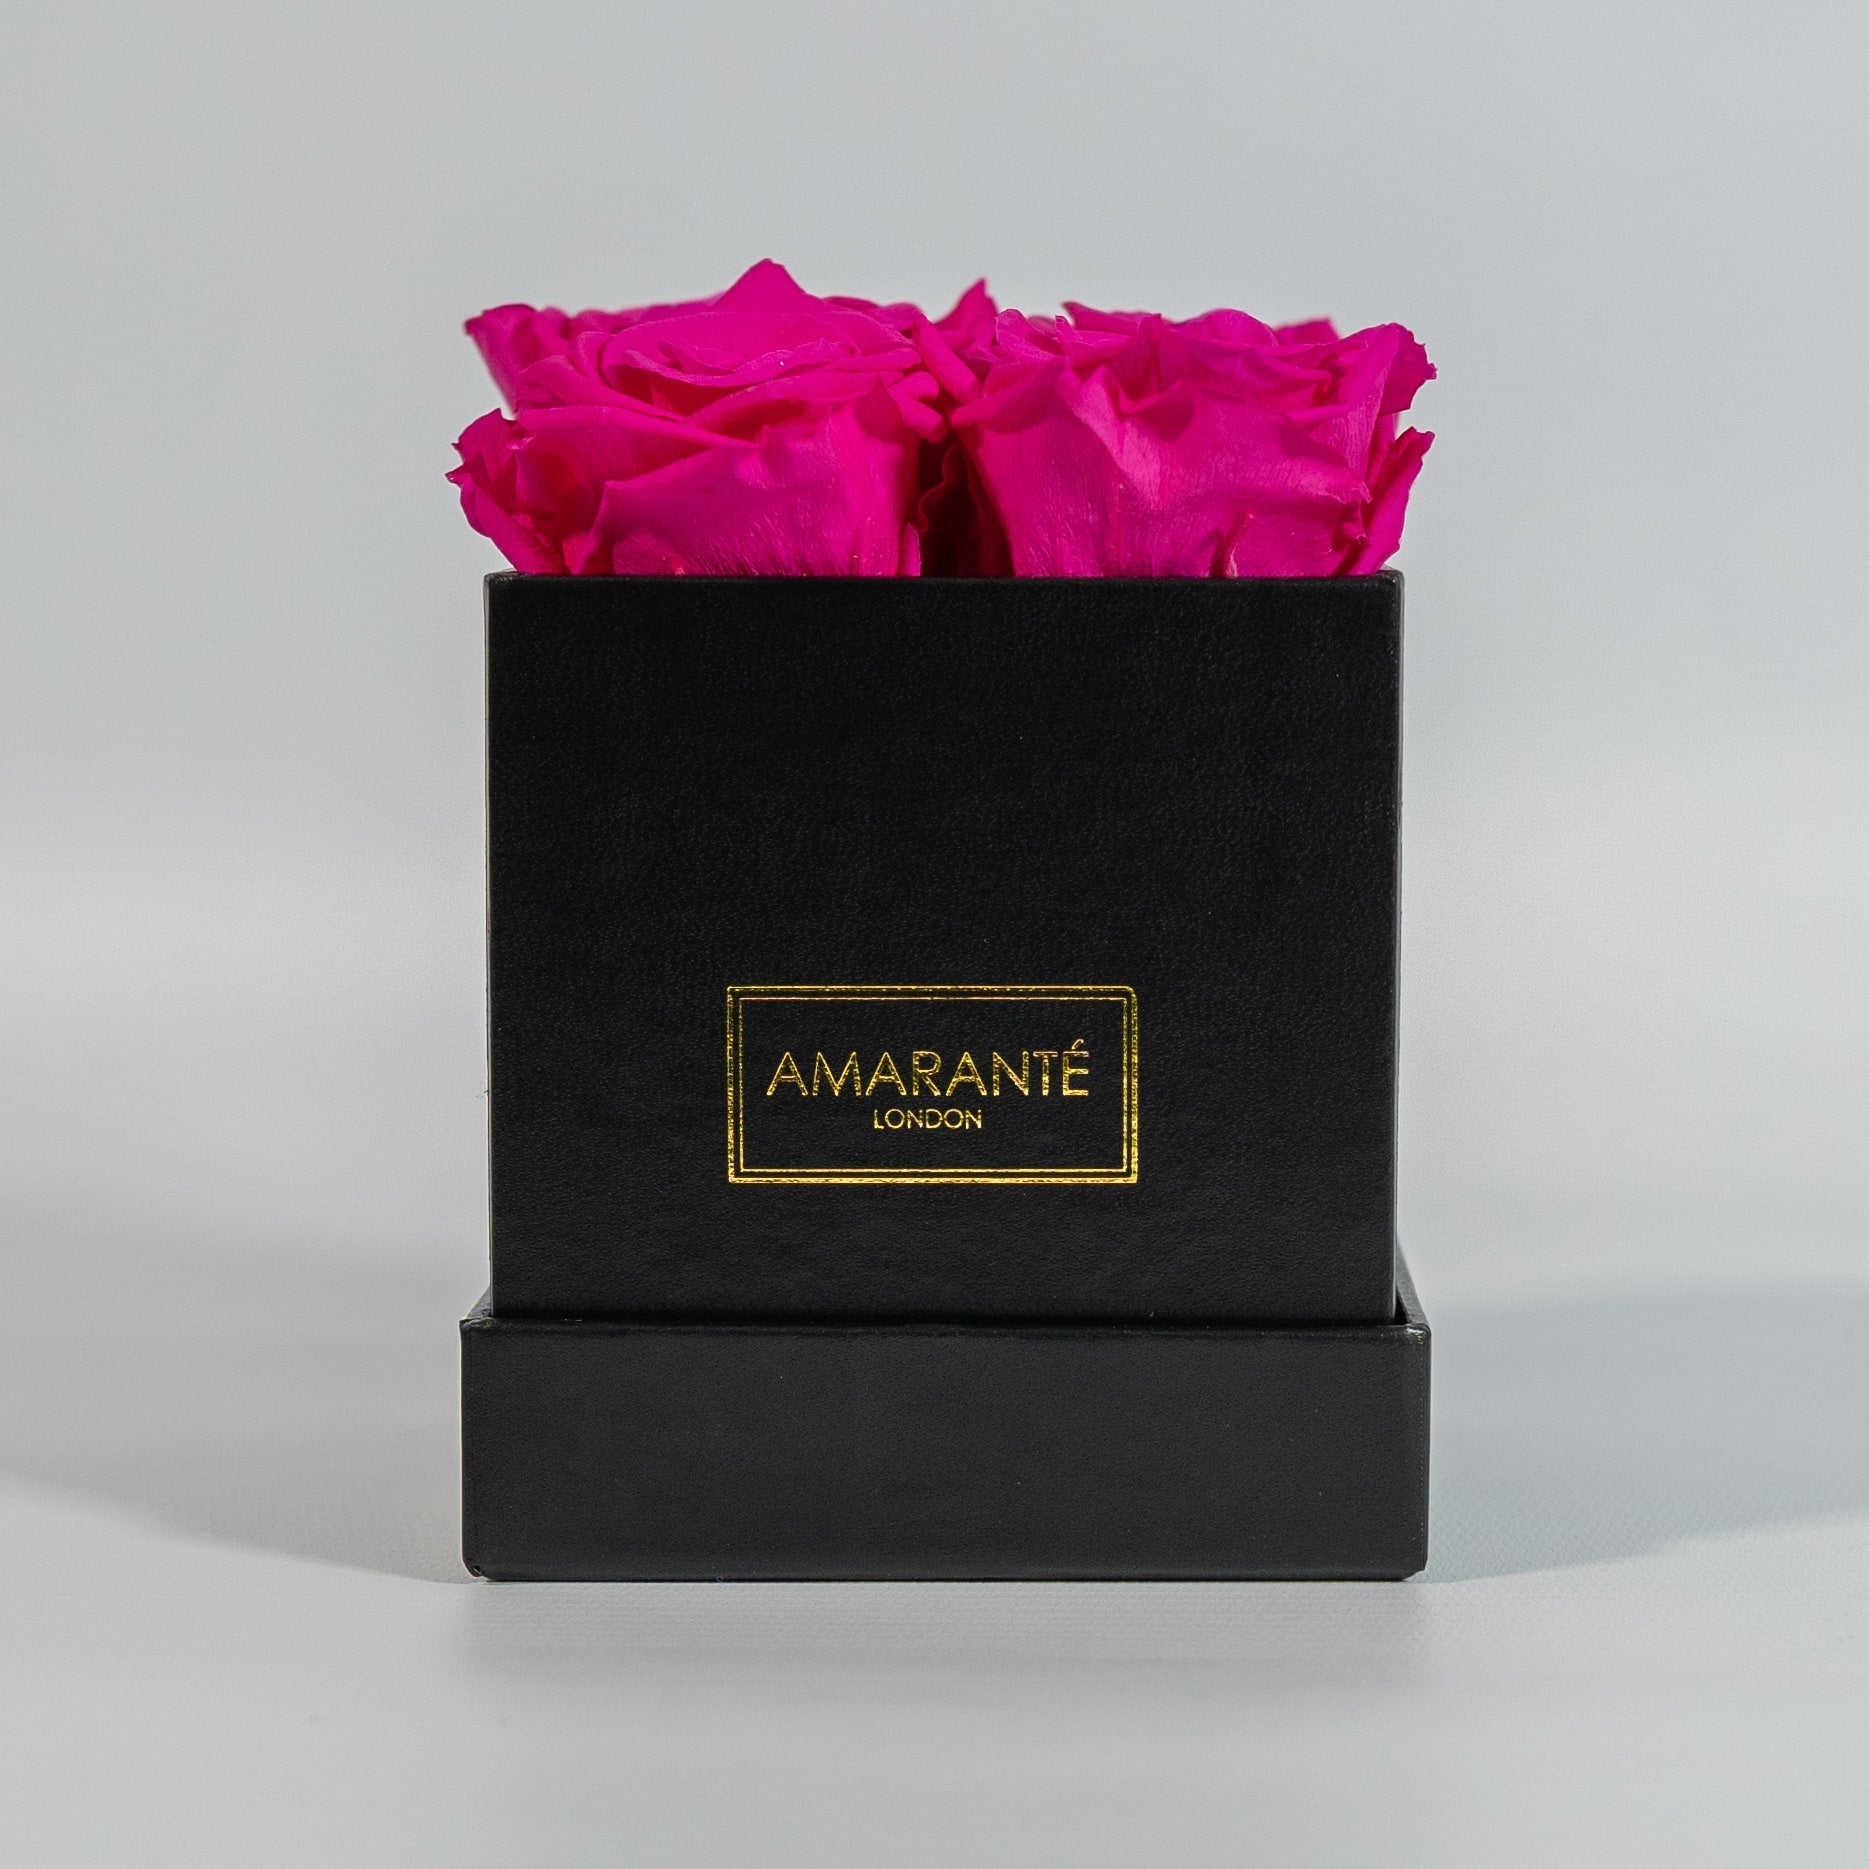 Distinctive hot pink roses shown in a stylish black box  